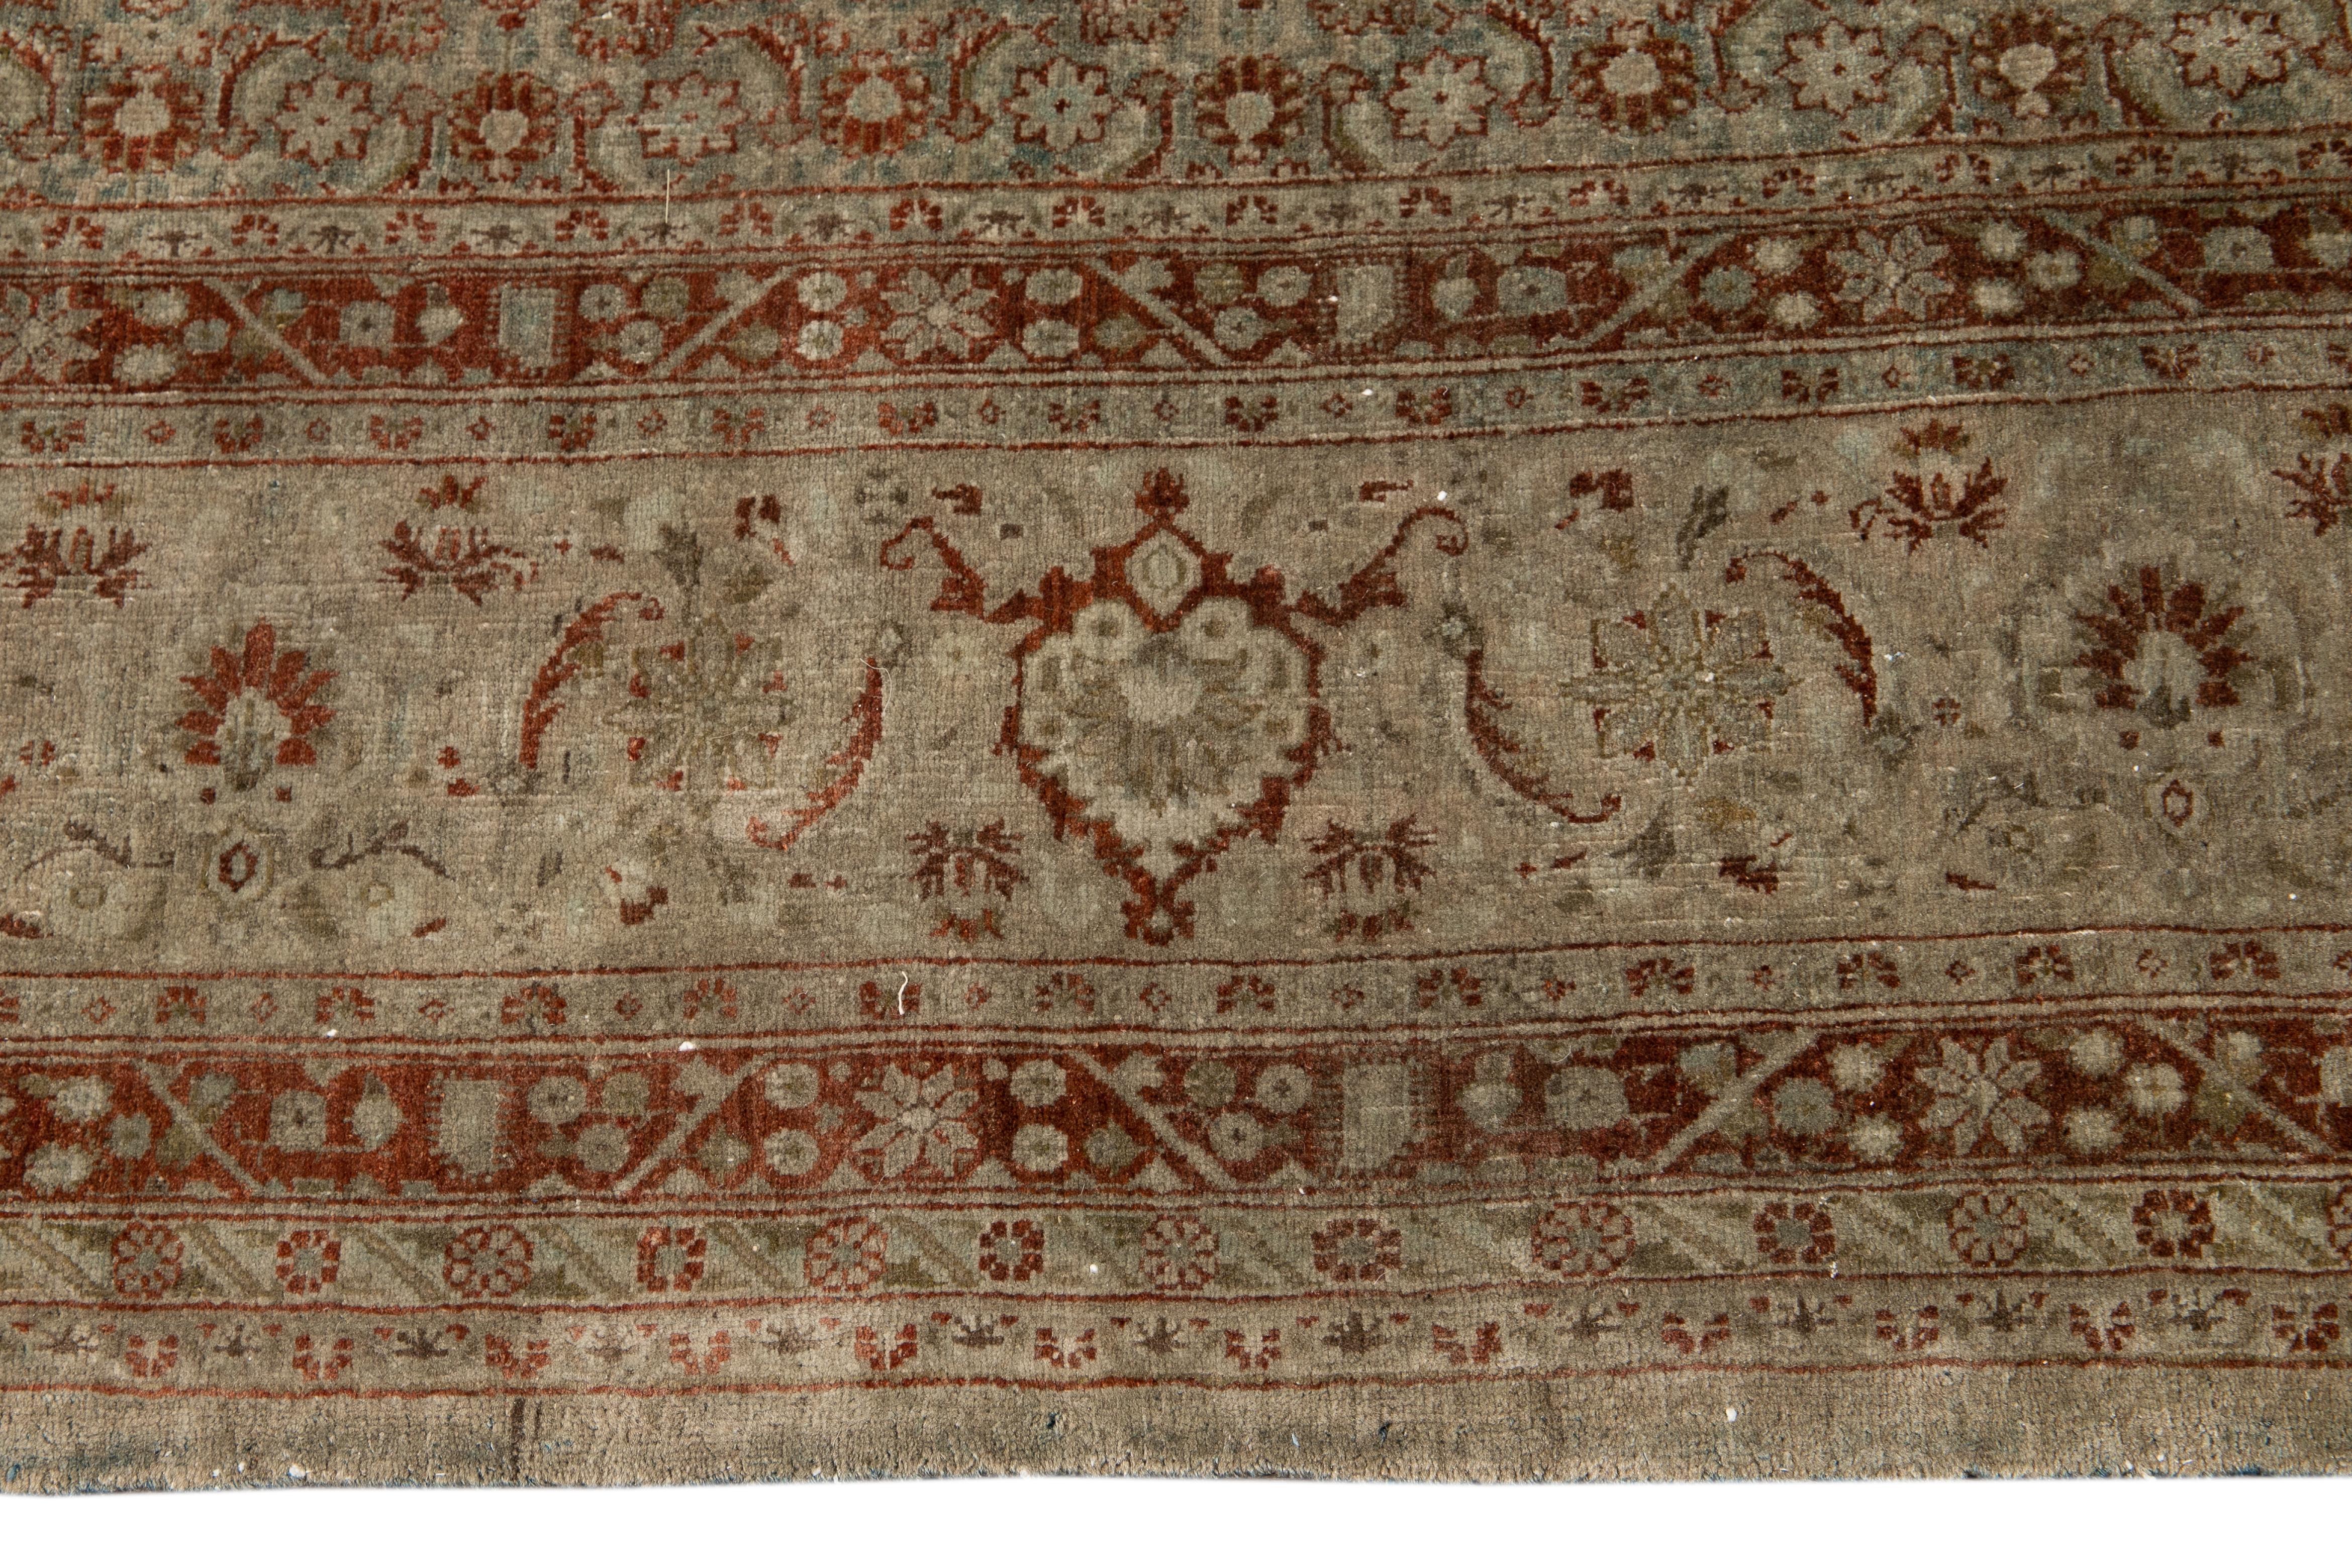 Early 20th Century Antique Tabriz Wool Rug In Good Condition For Sale In Norwalk, CT